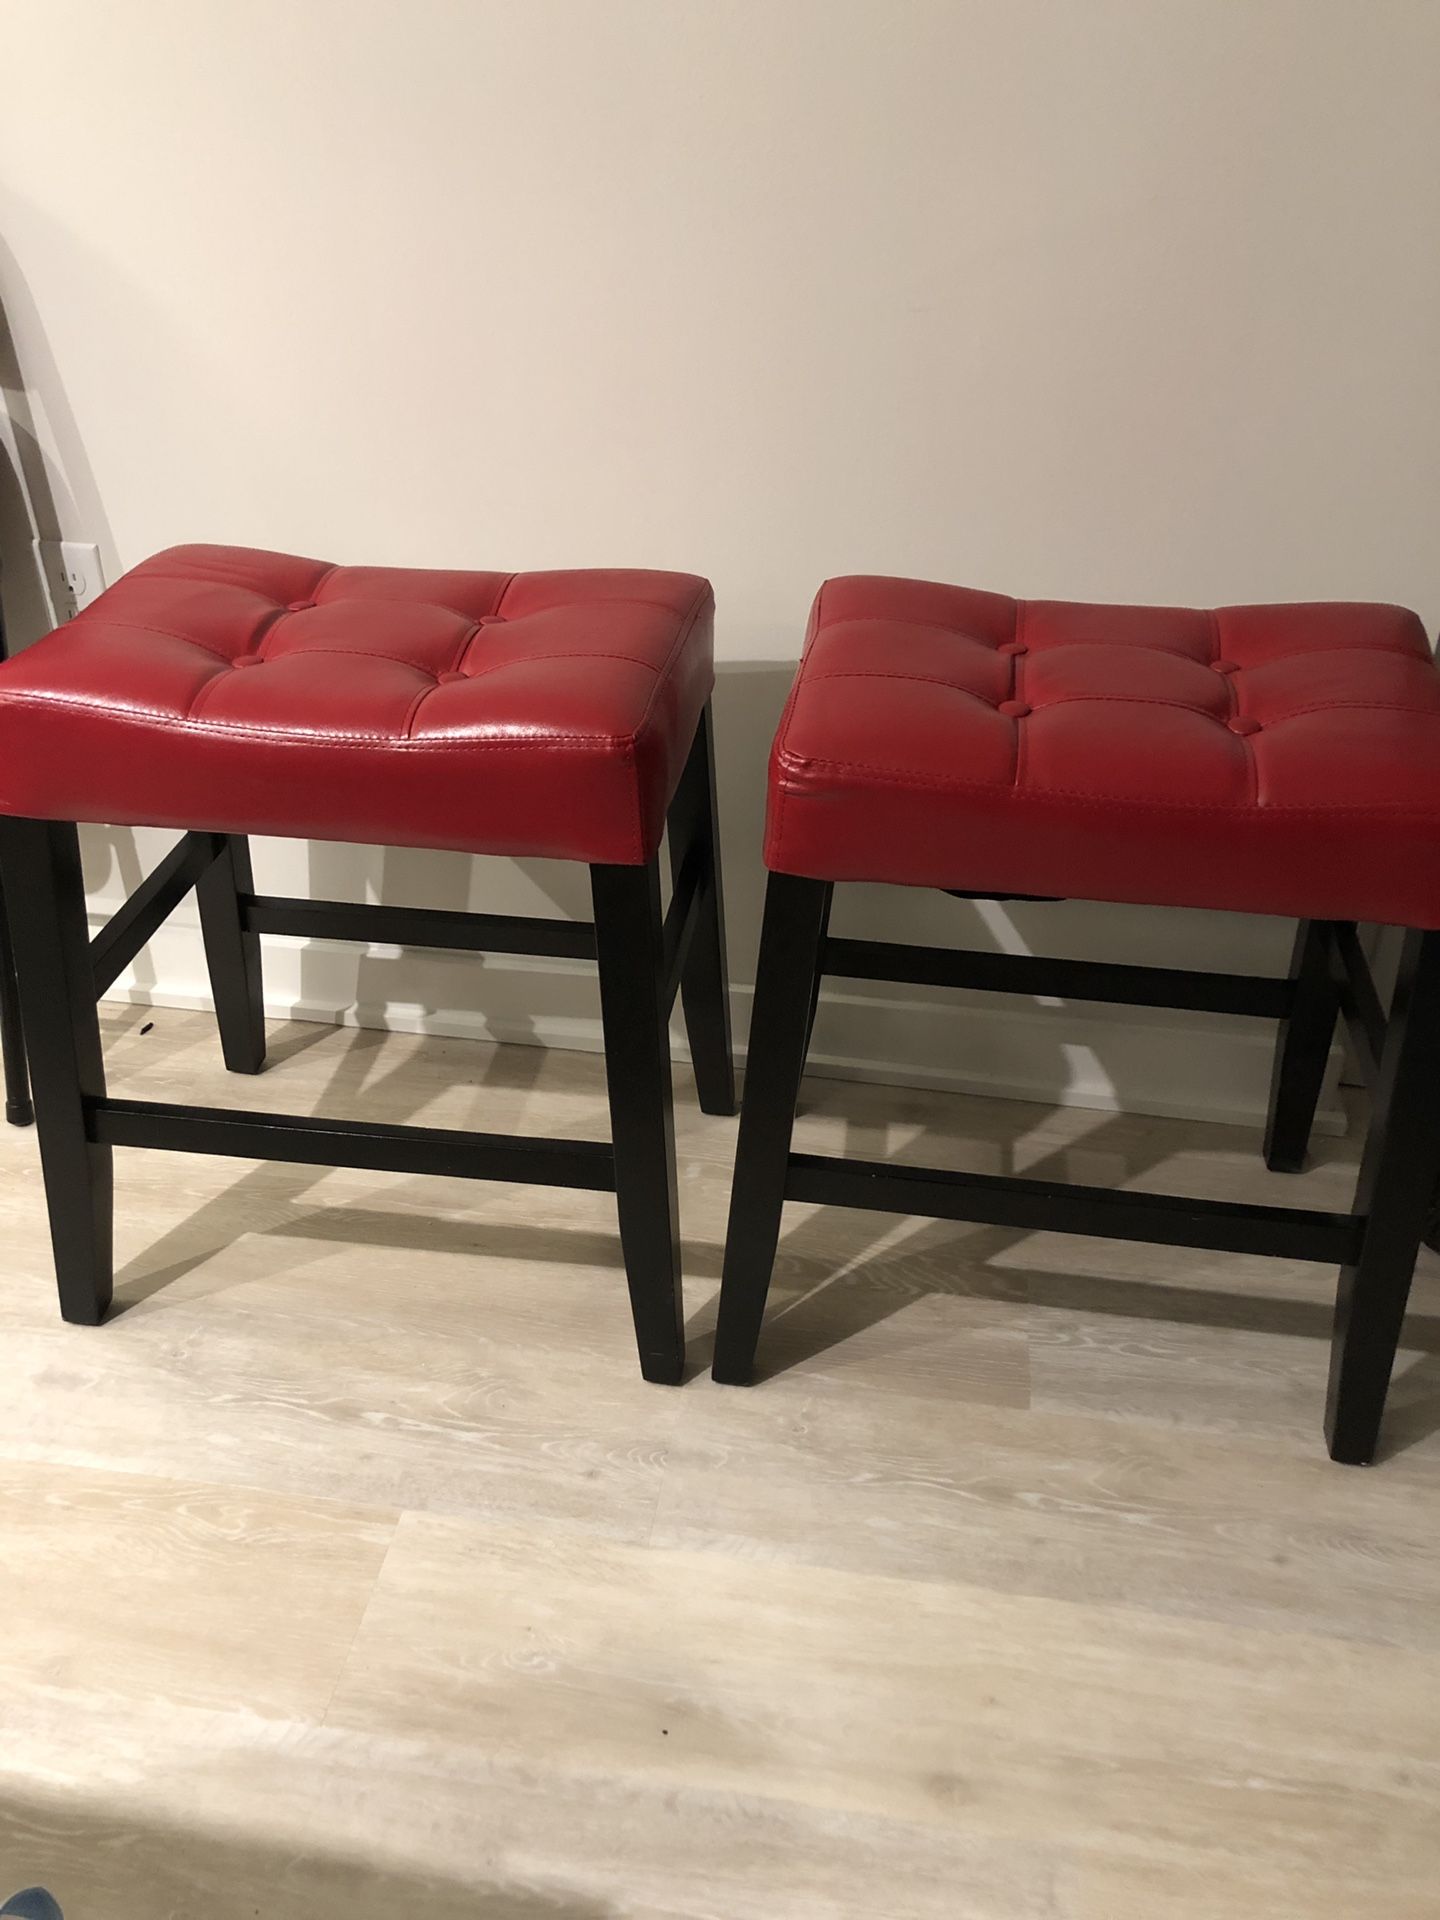 HK Madison Bar Stools: Height-24-in